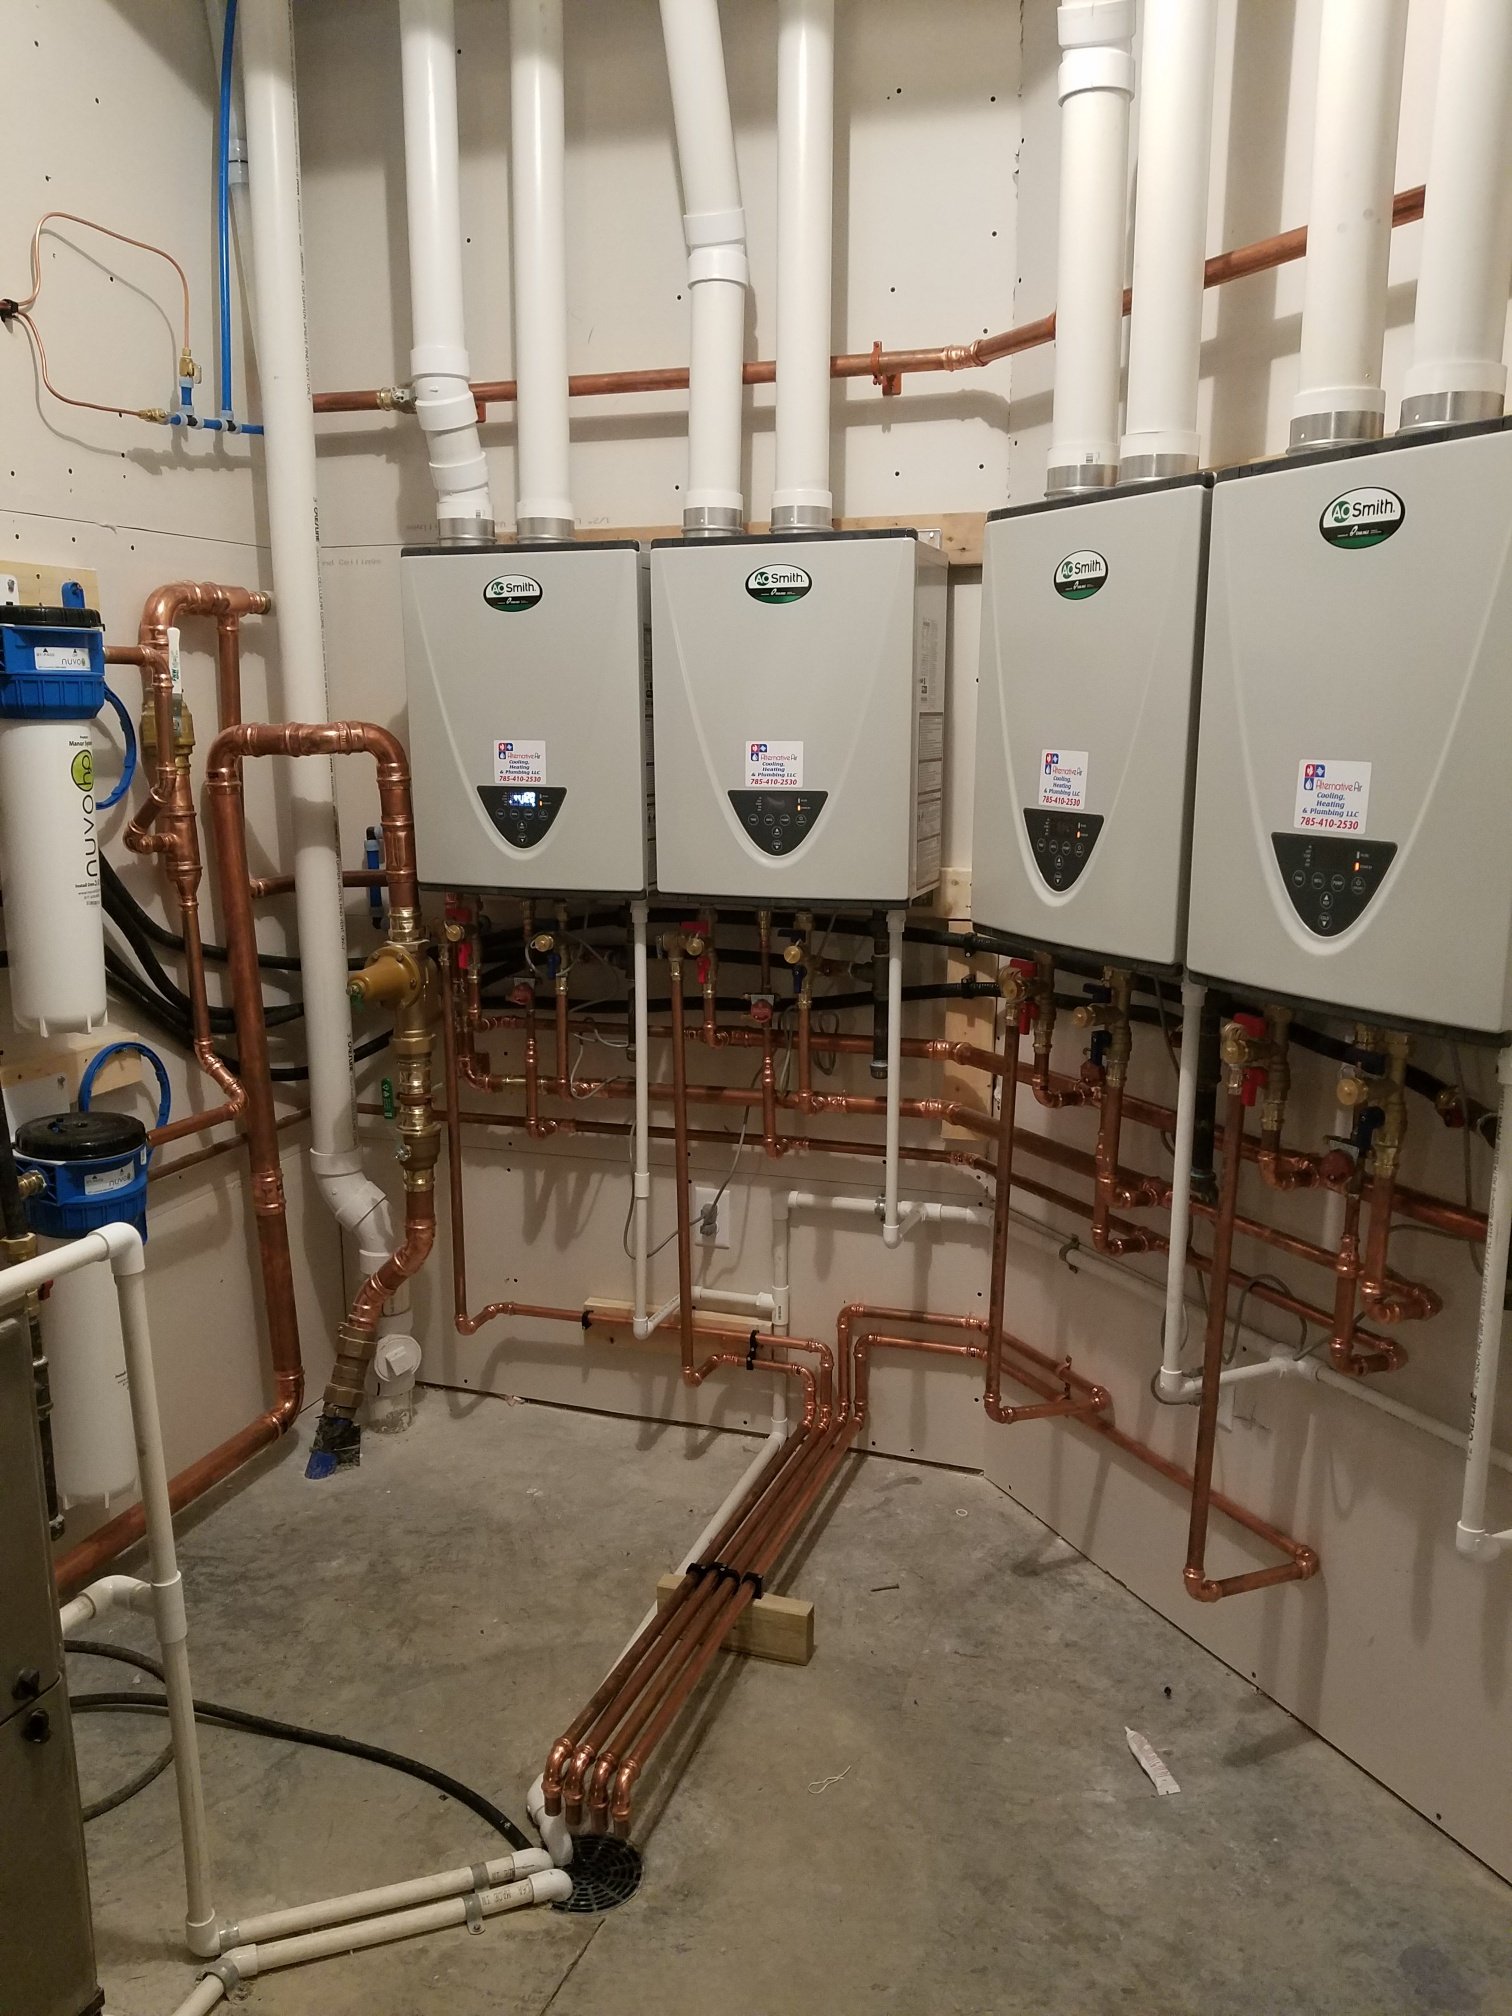 AO Smith Tankless Water Heaters